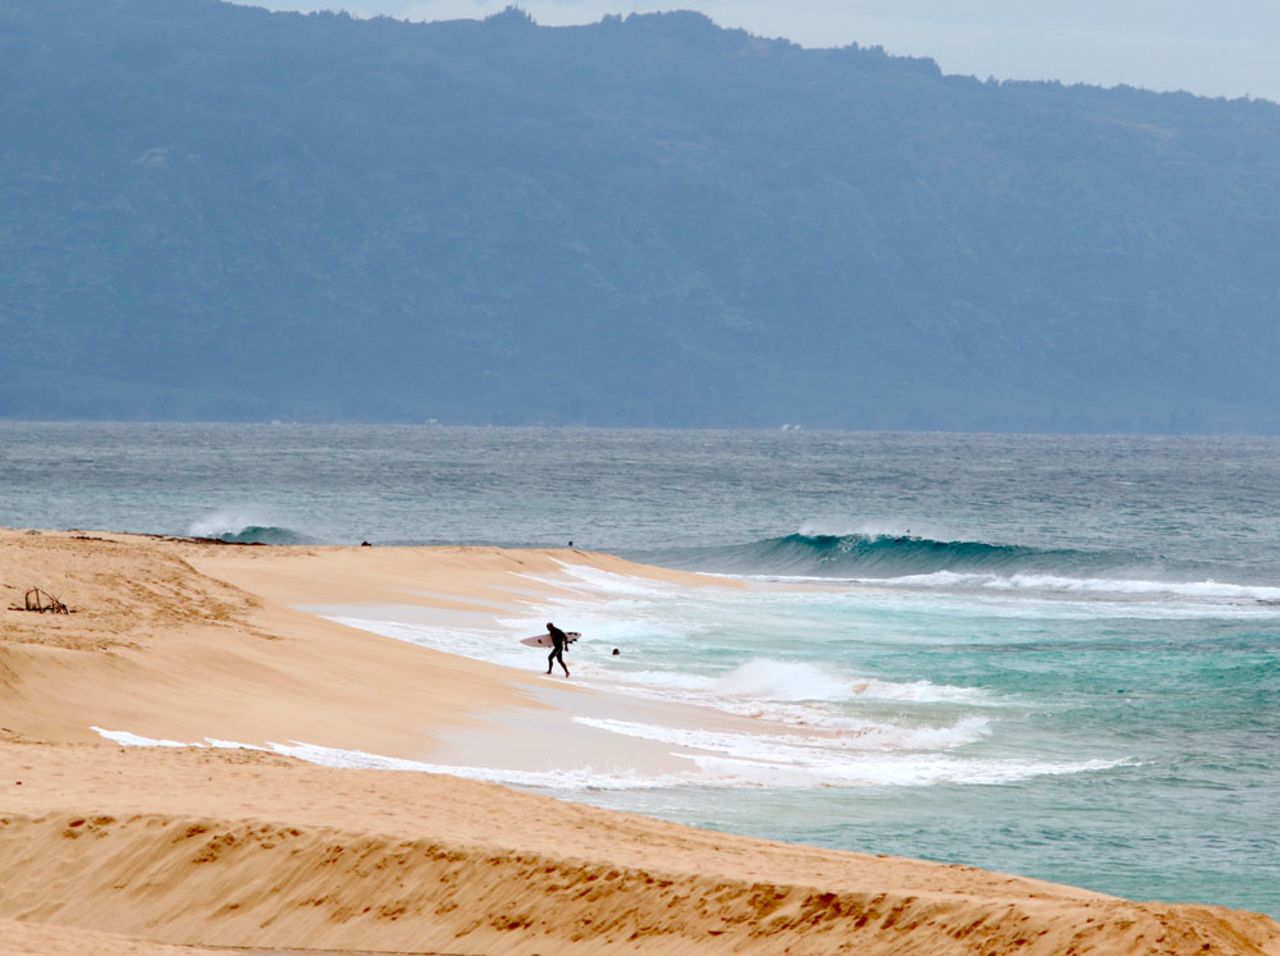 A surfer walks out of the ocean on Oahu's North Shore near Haleiwa, Hawaii, on Tuesday, March 31.